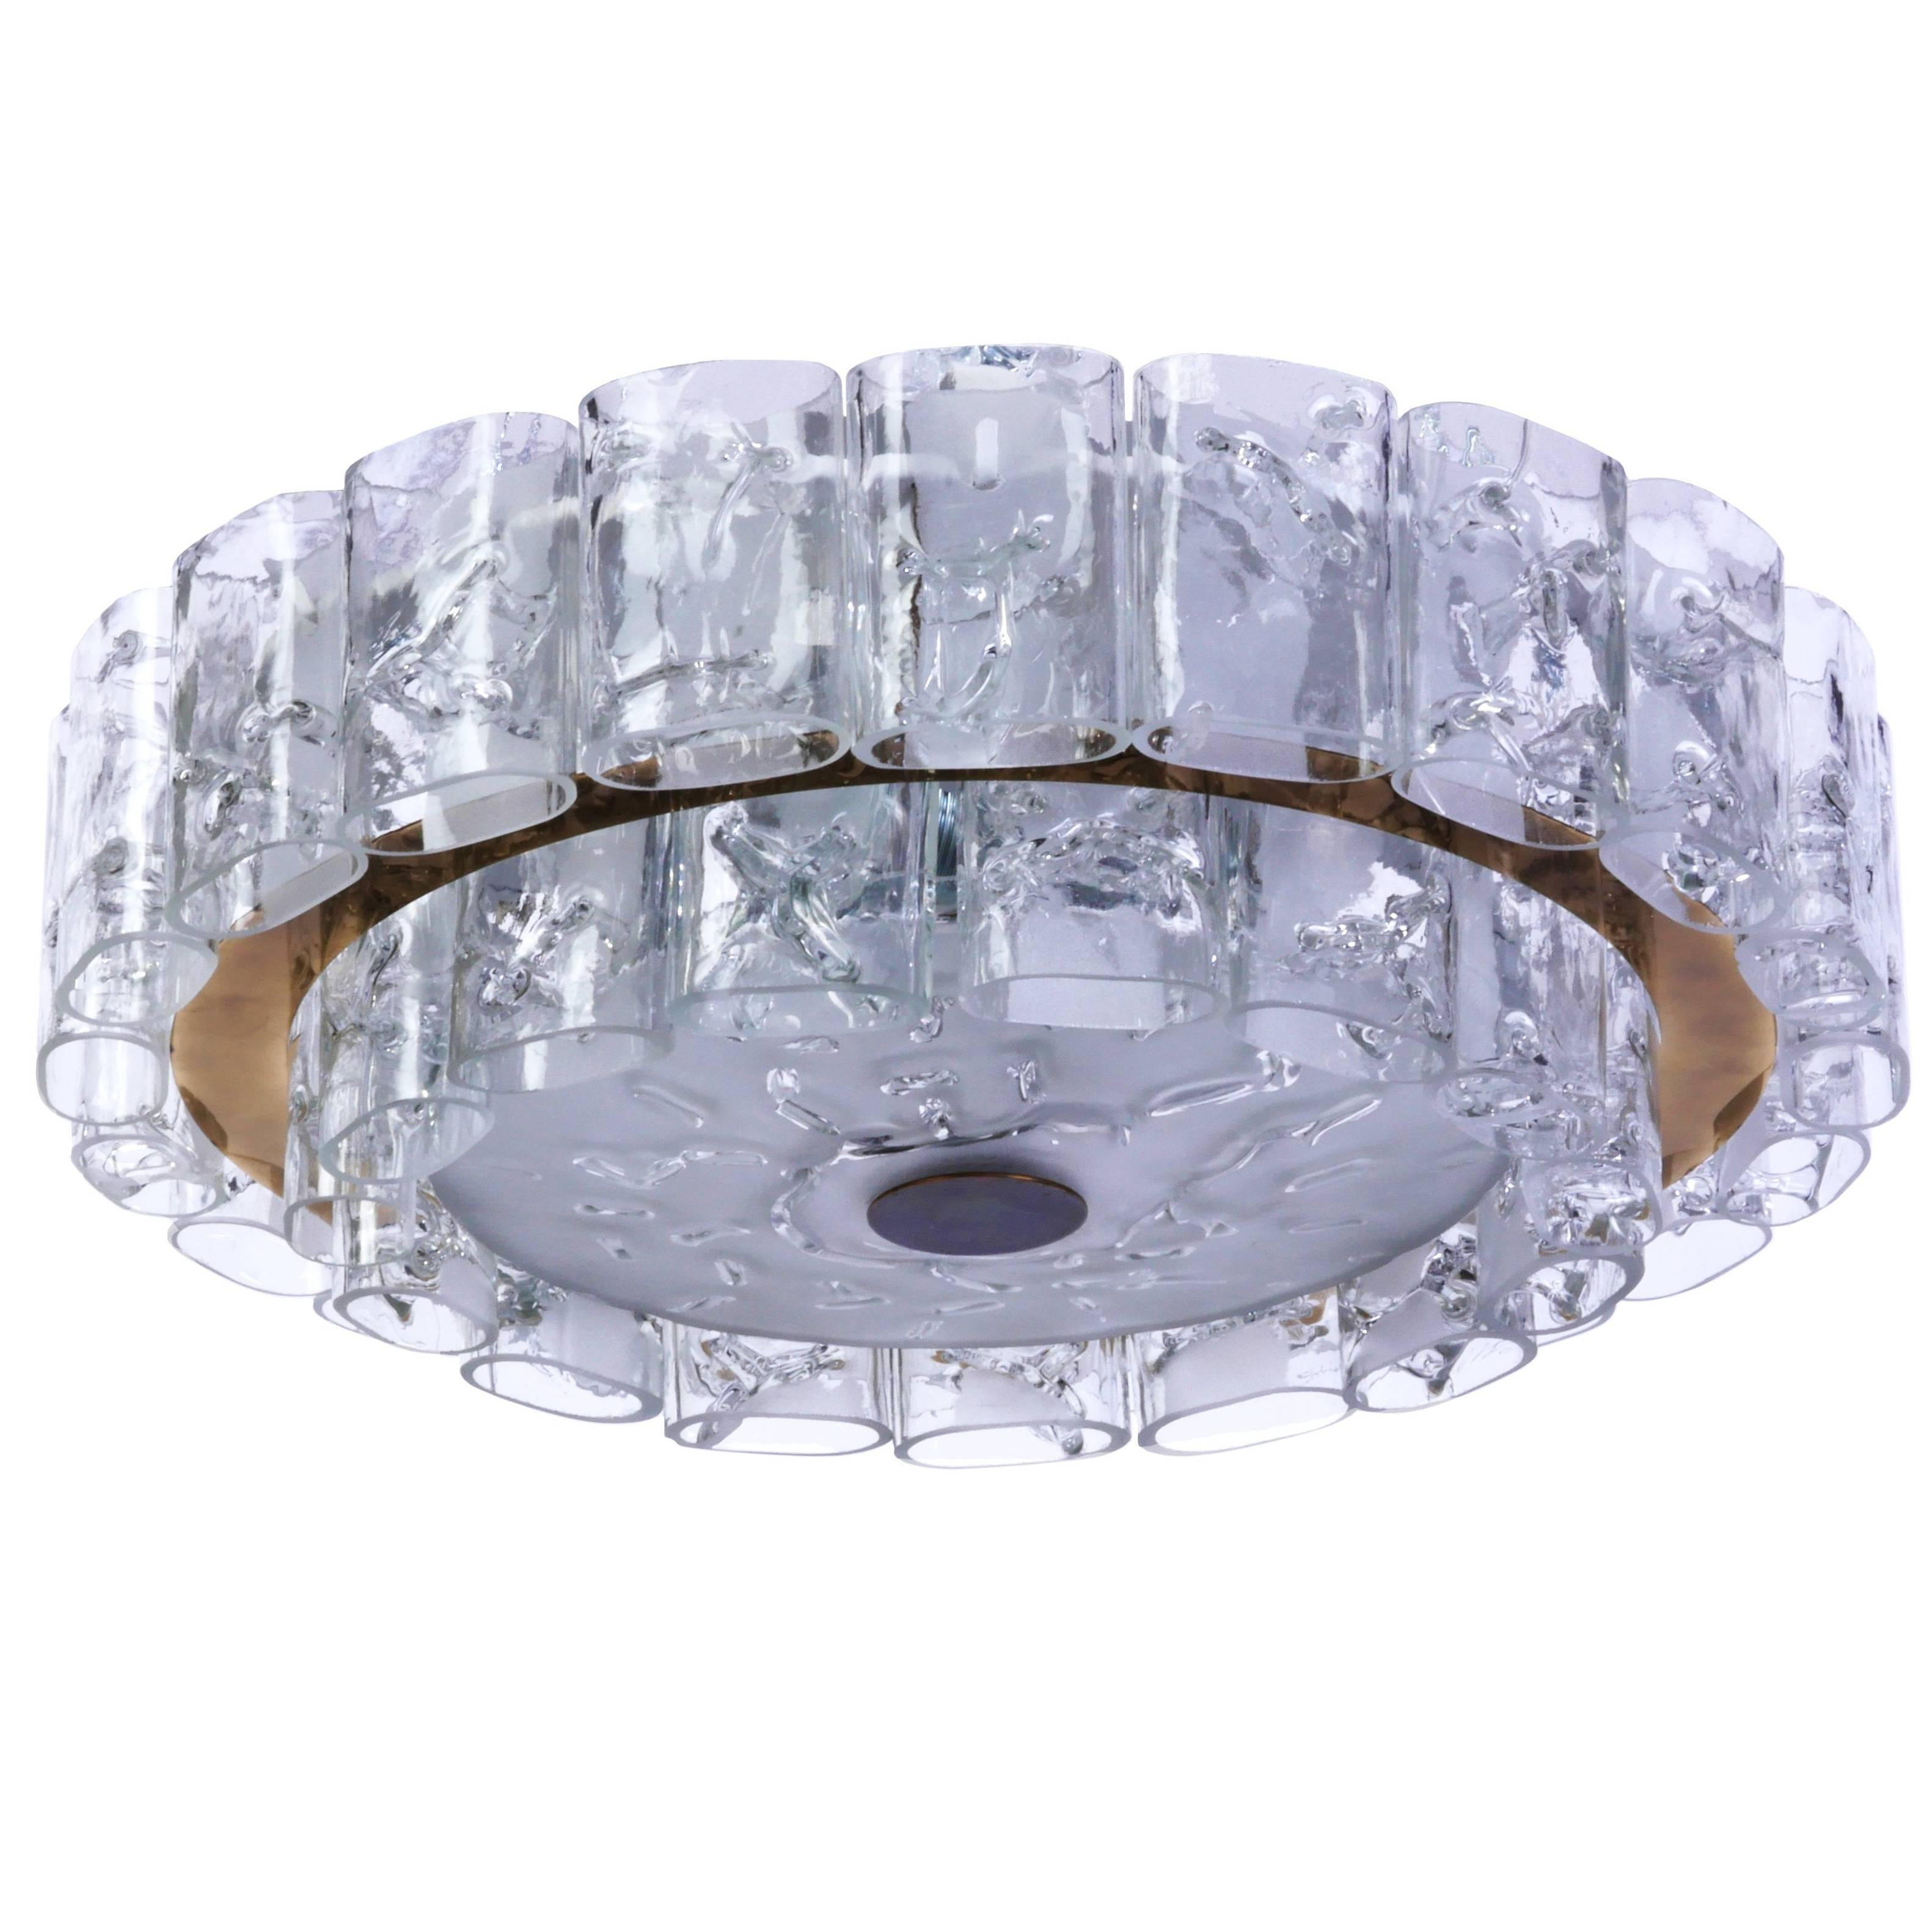 Beautiful 1960s Mid-Century Modernist Flush Mount by Doria For Sale